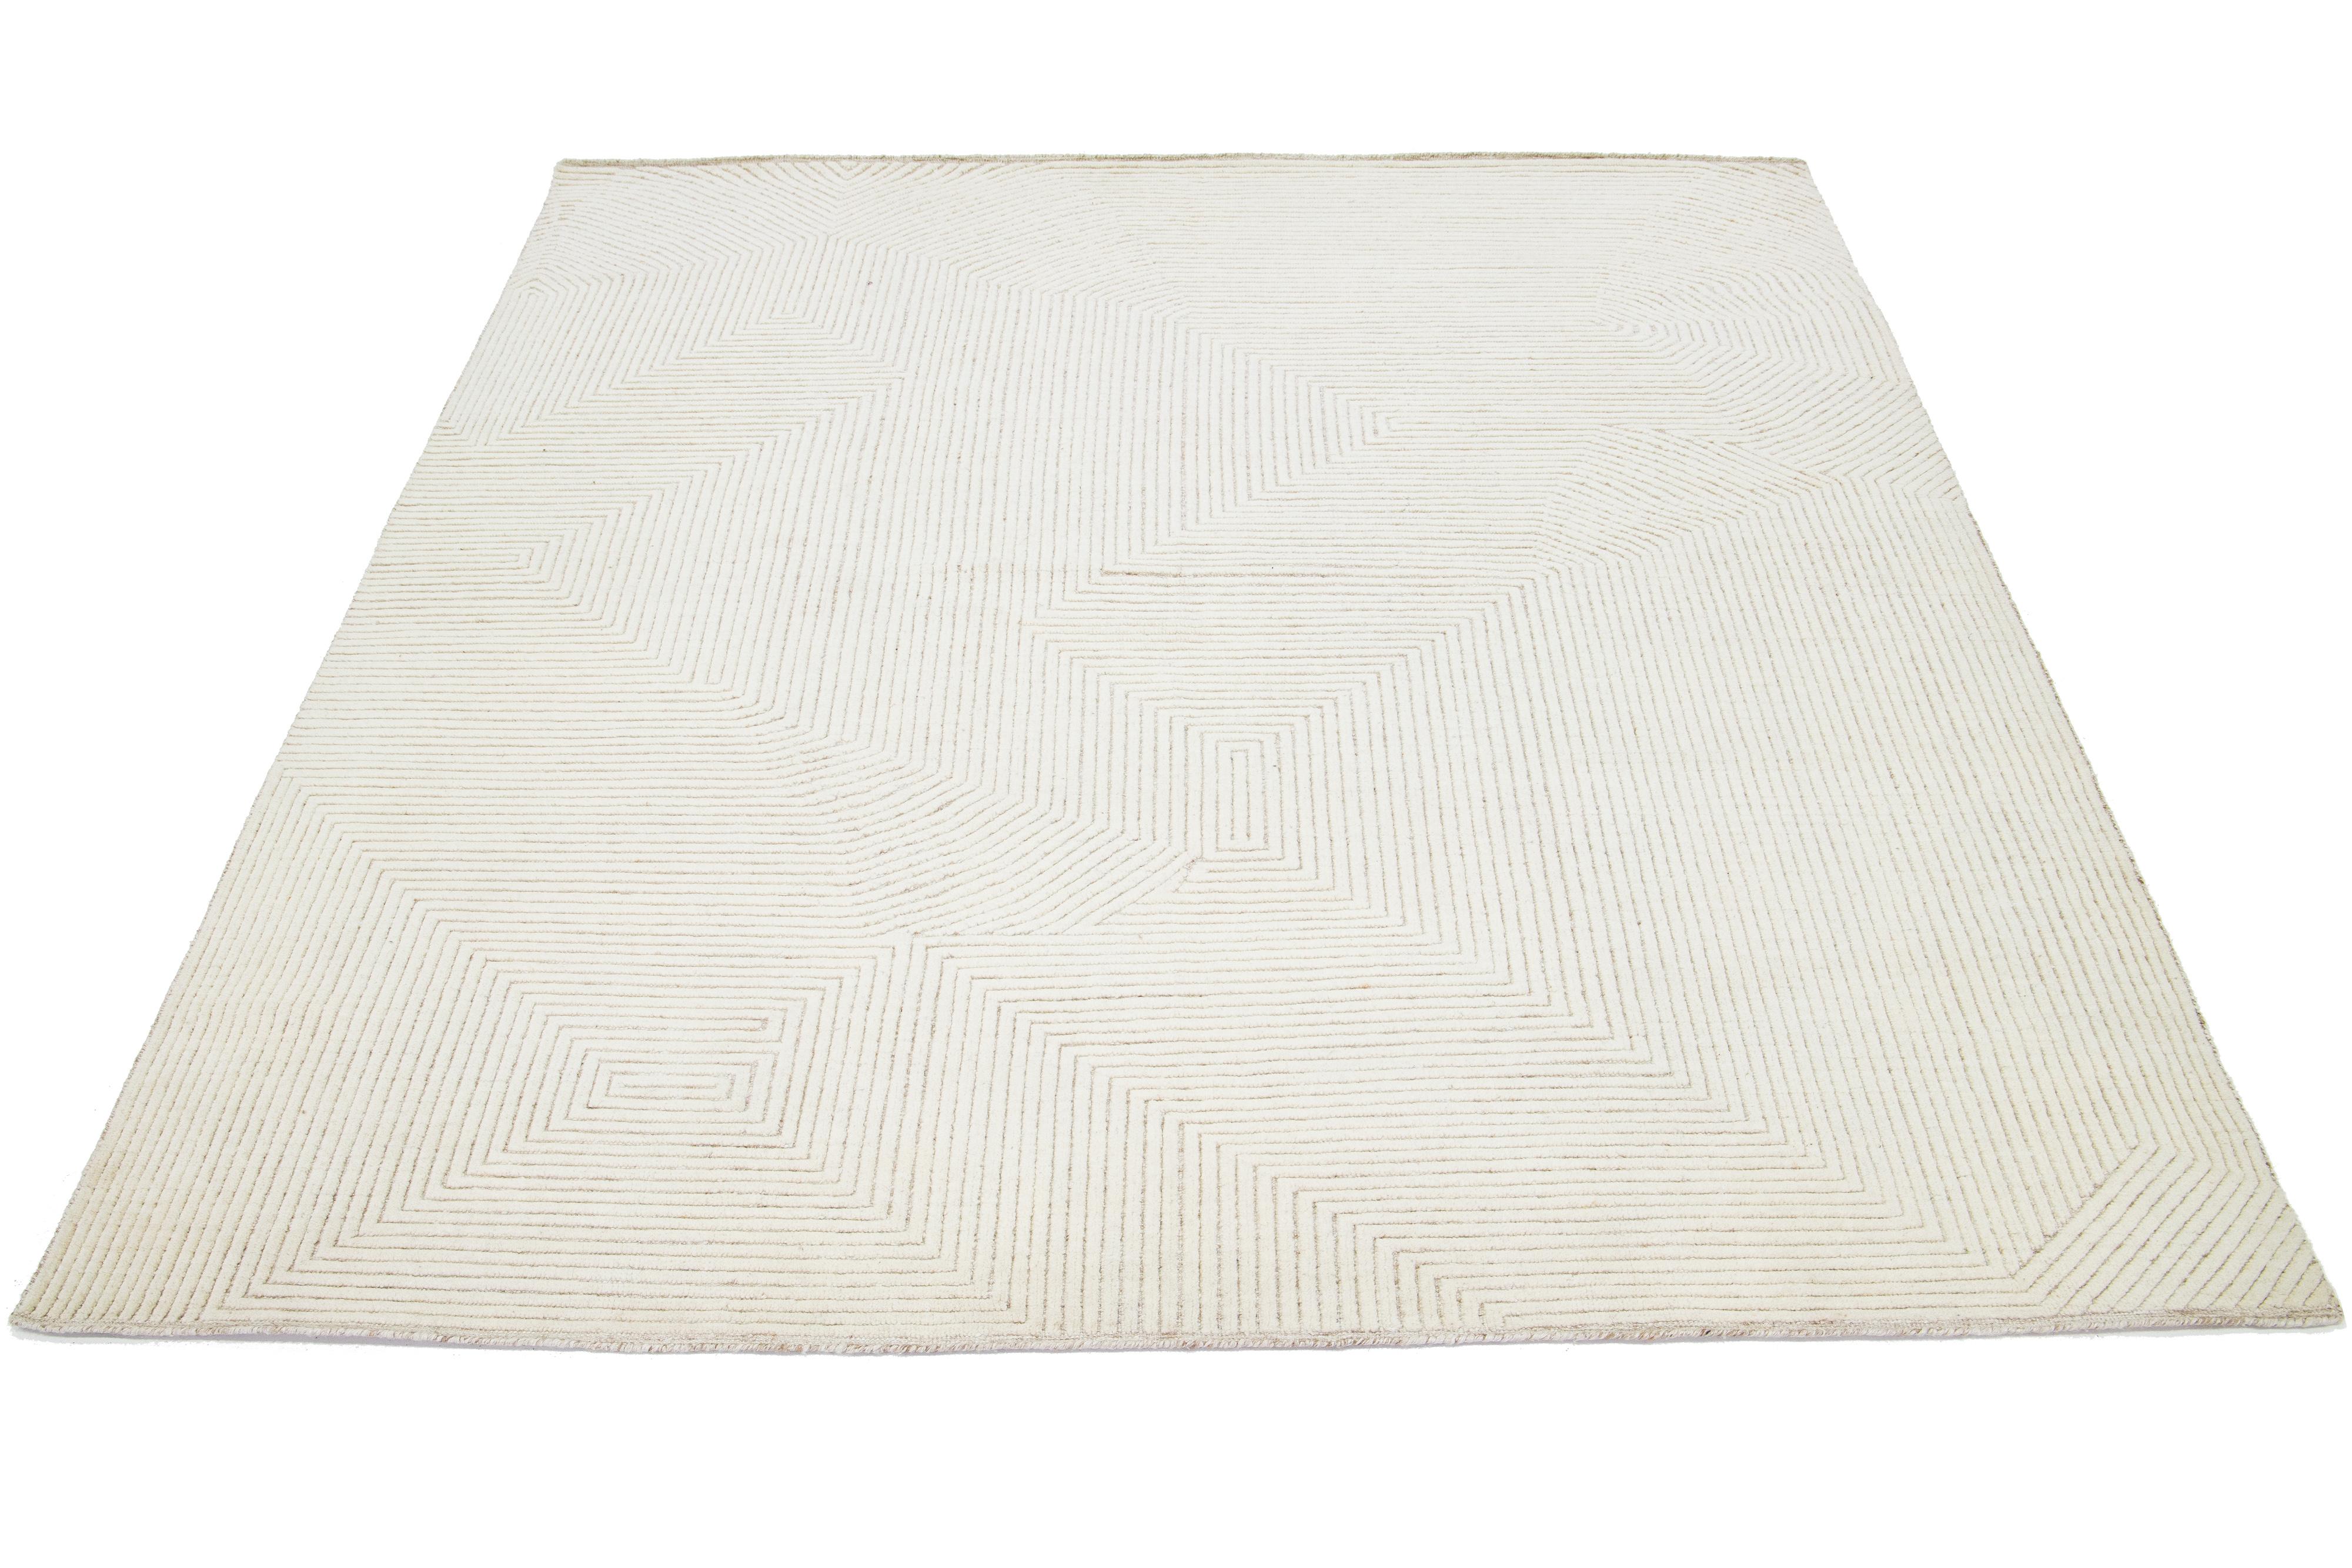 This modern Moroccan rug is hand-knotted from wool and showcases an elegant geometric design in exquisite shades of ivory.

This rug measures 8' x 10'1